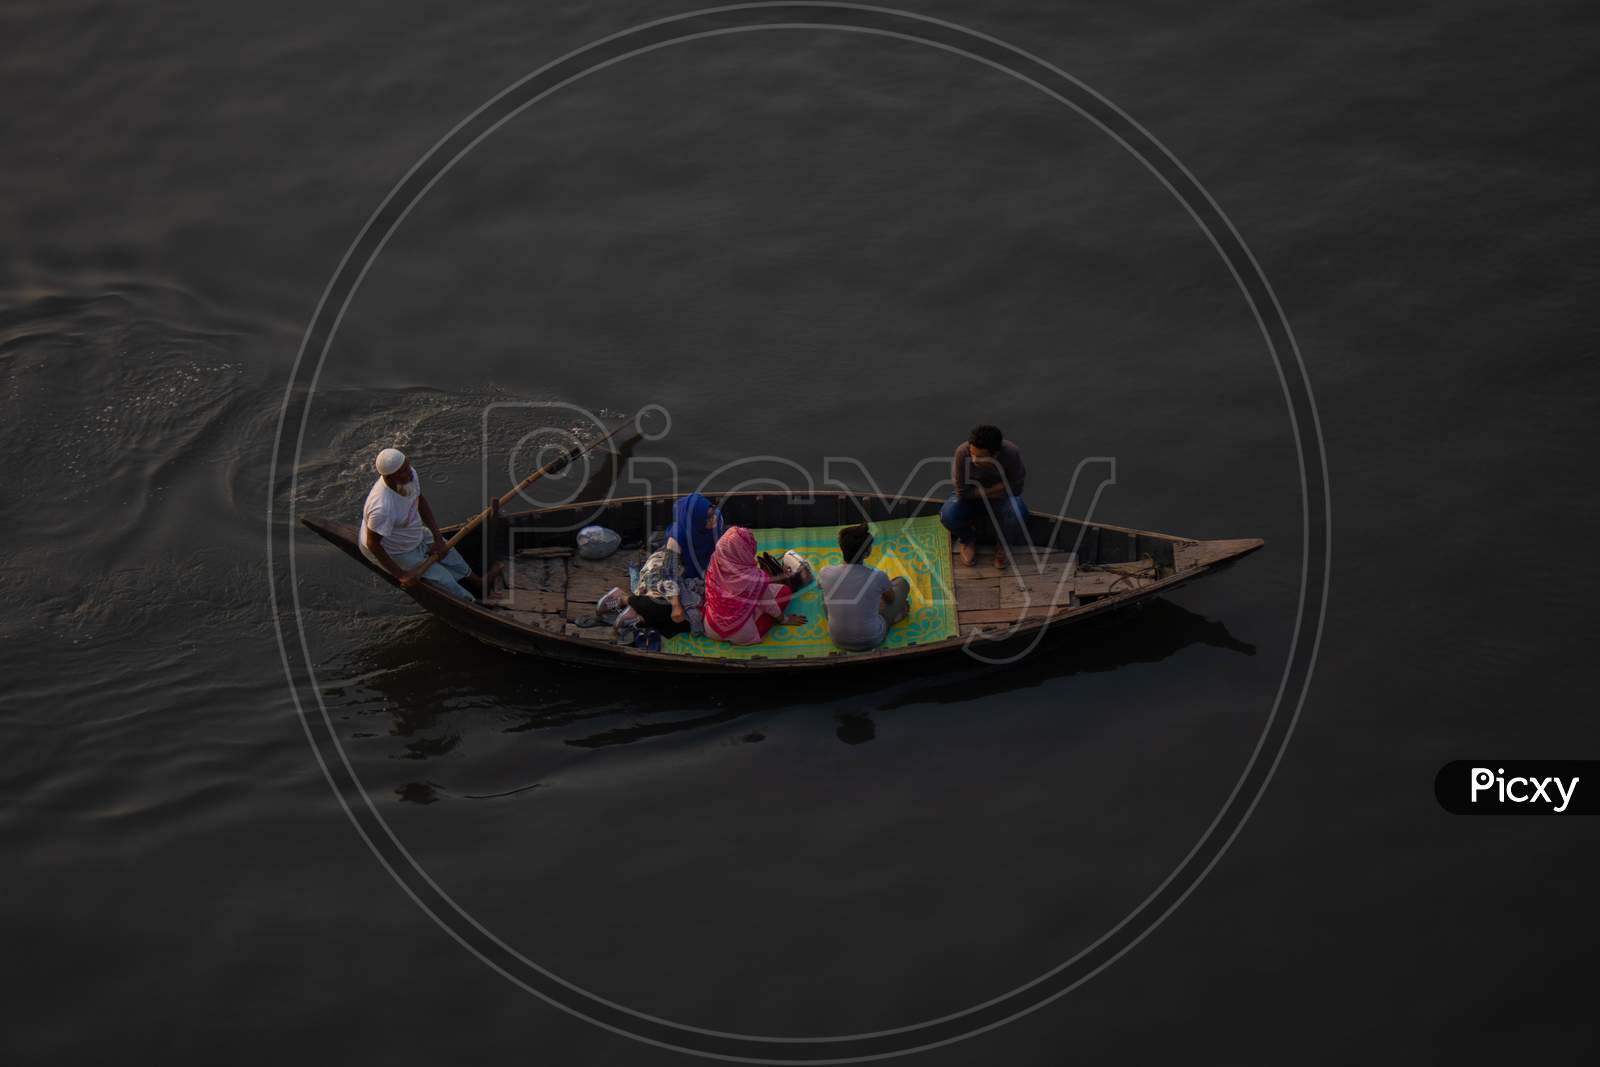 The Couple Is Cruising In The River. The Boat Is Floating. This Is A View Of The River Buriganga In Bangladesh.